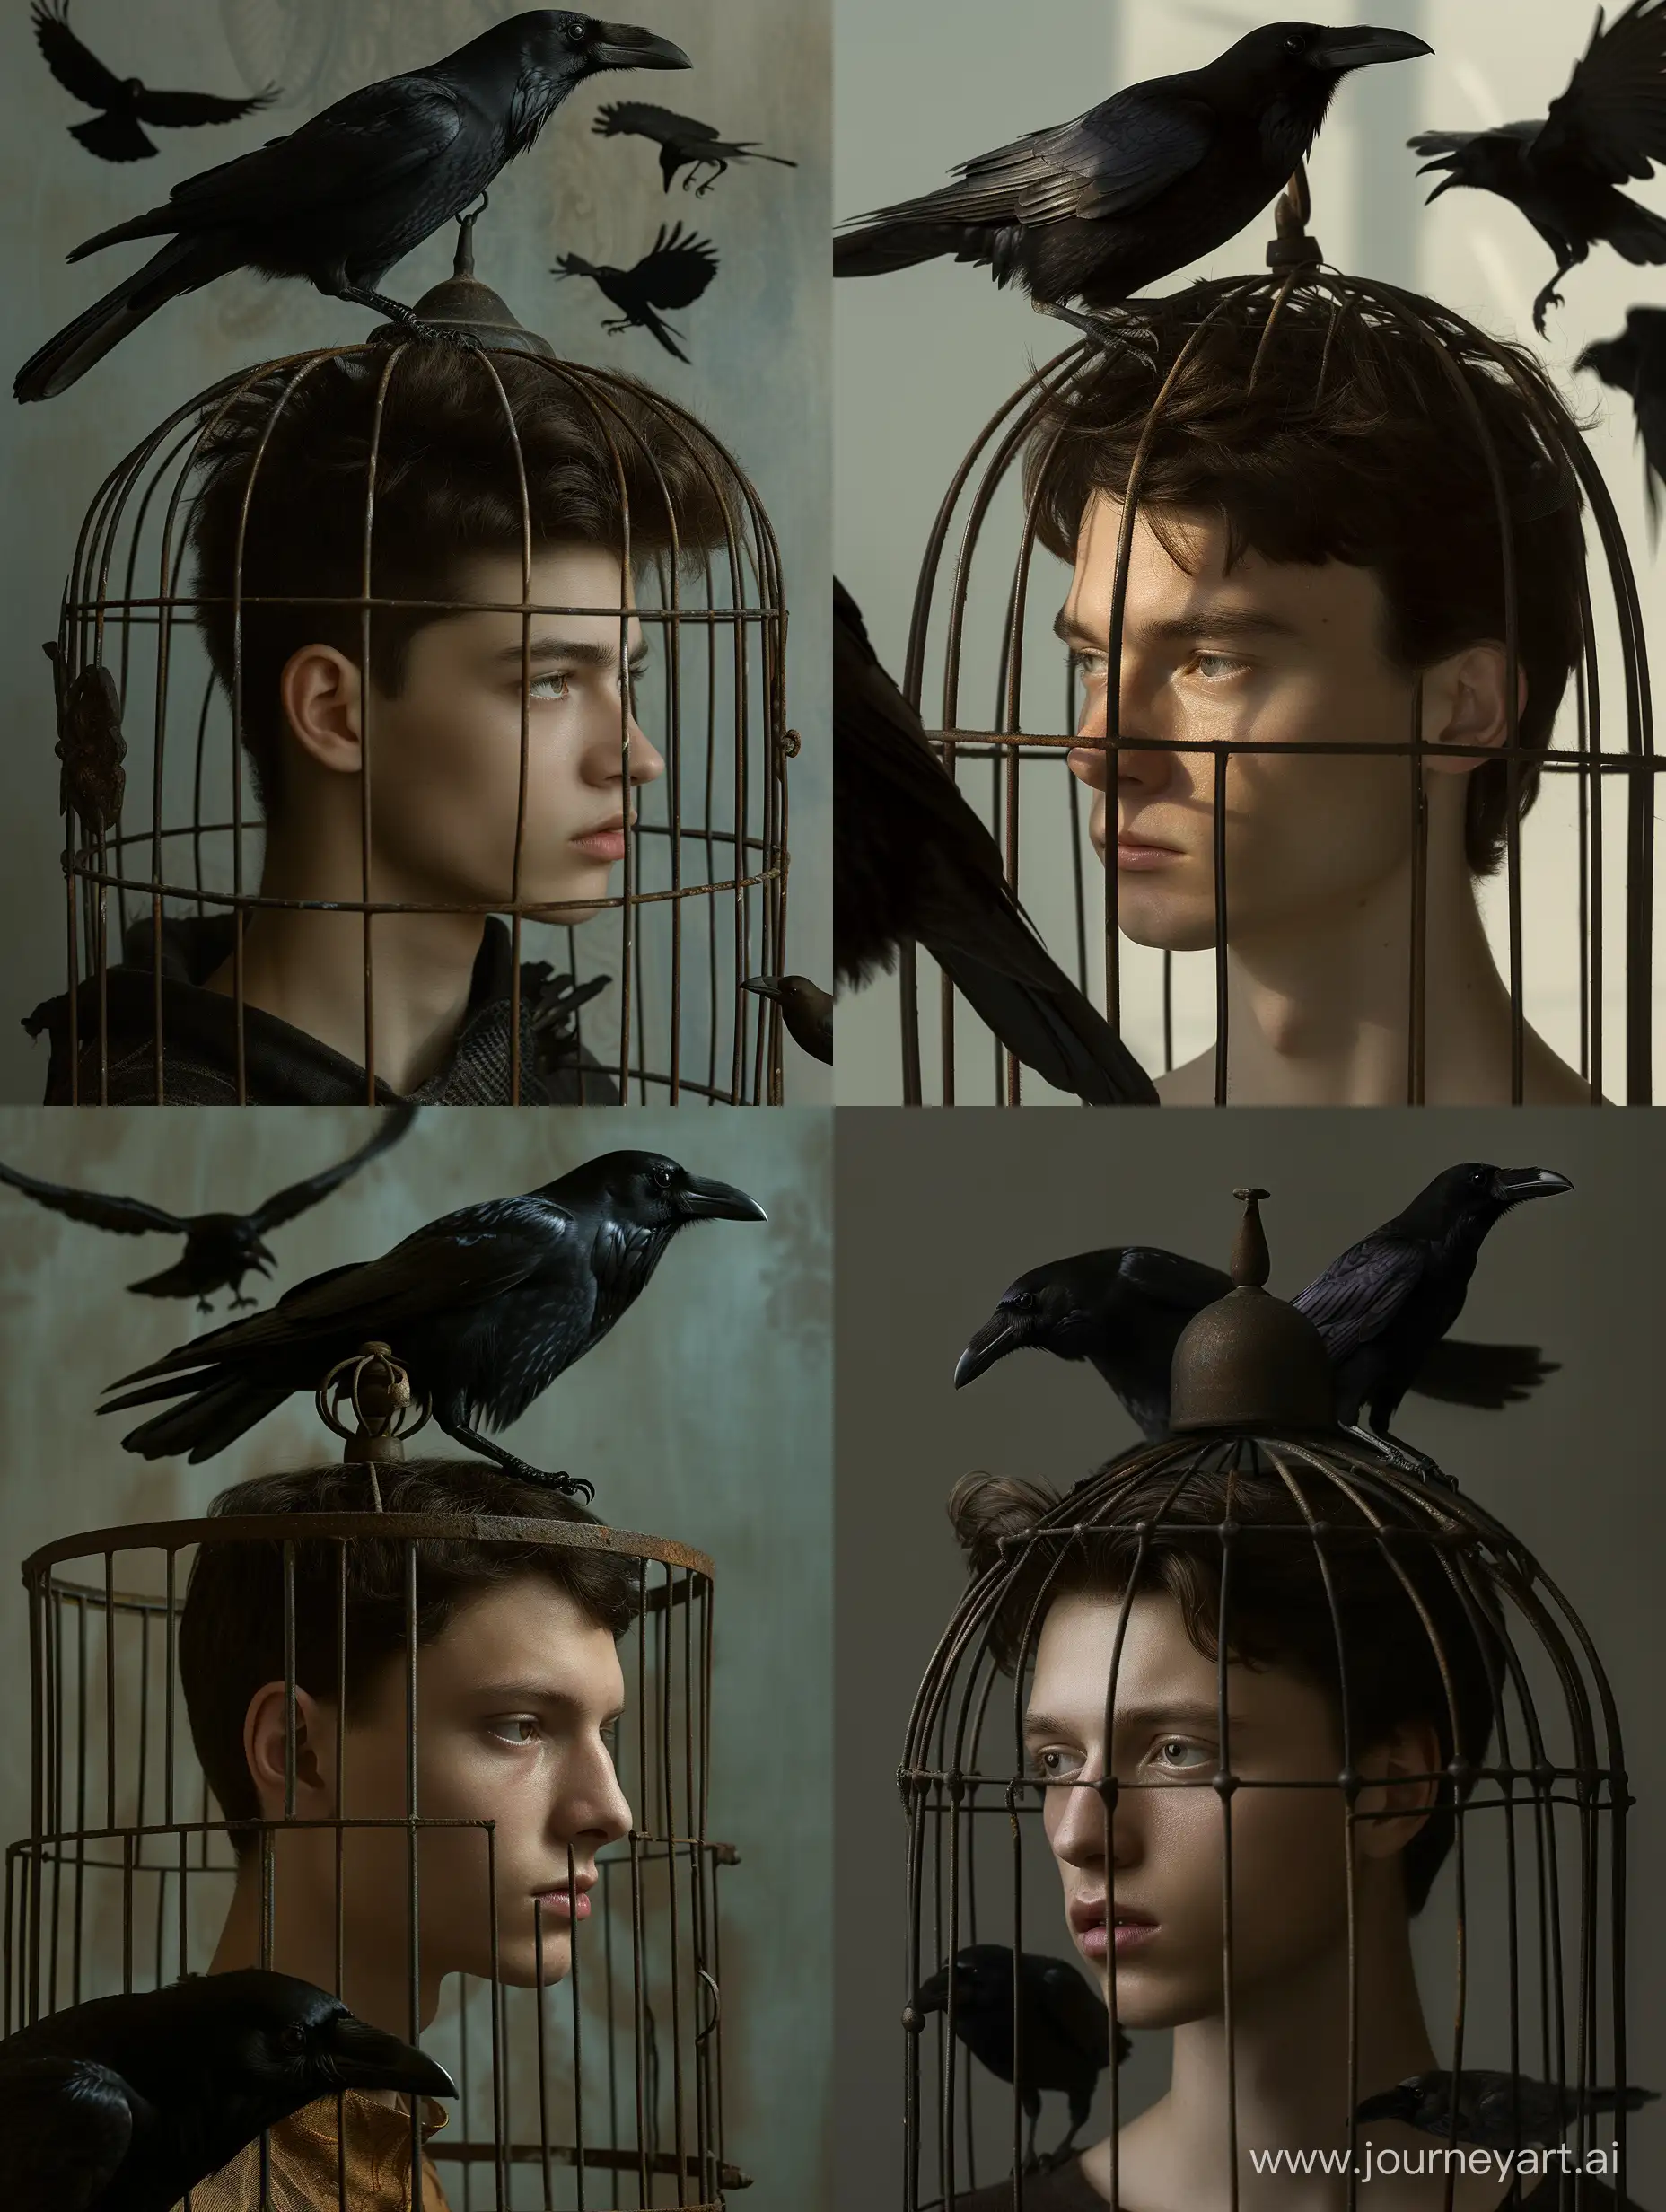 Dramatic-Portrait-Slavic-Man-Captured-in-a-Metal-Bird-Cage-with-Raven-and-Crows